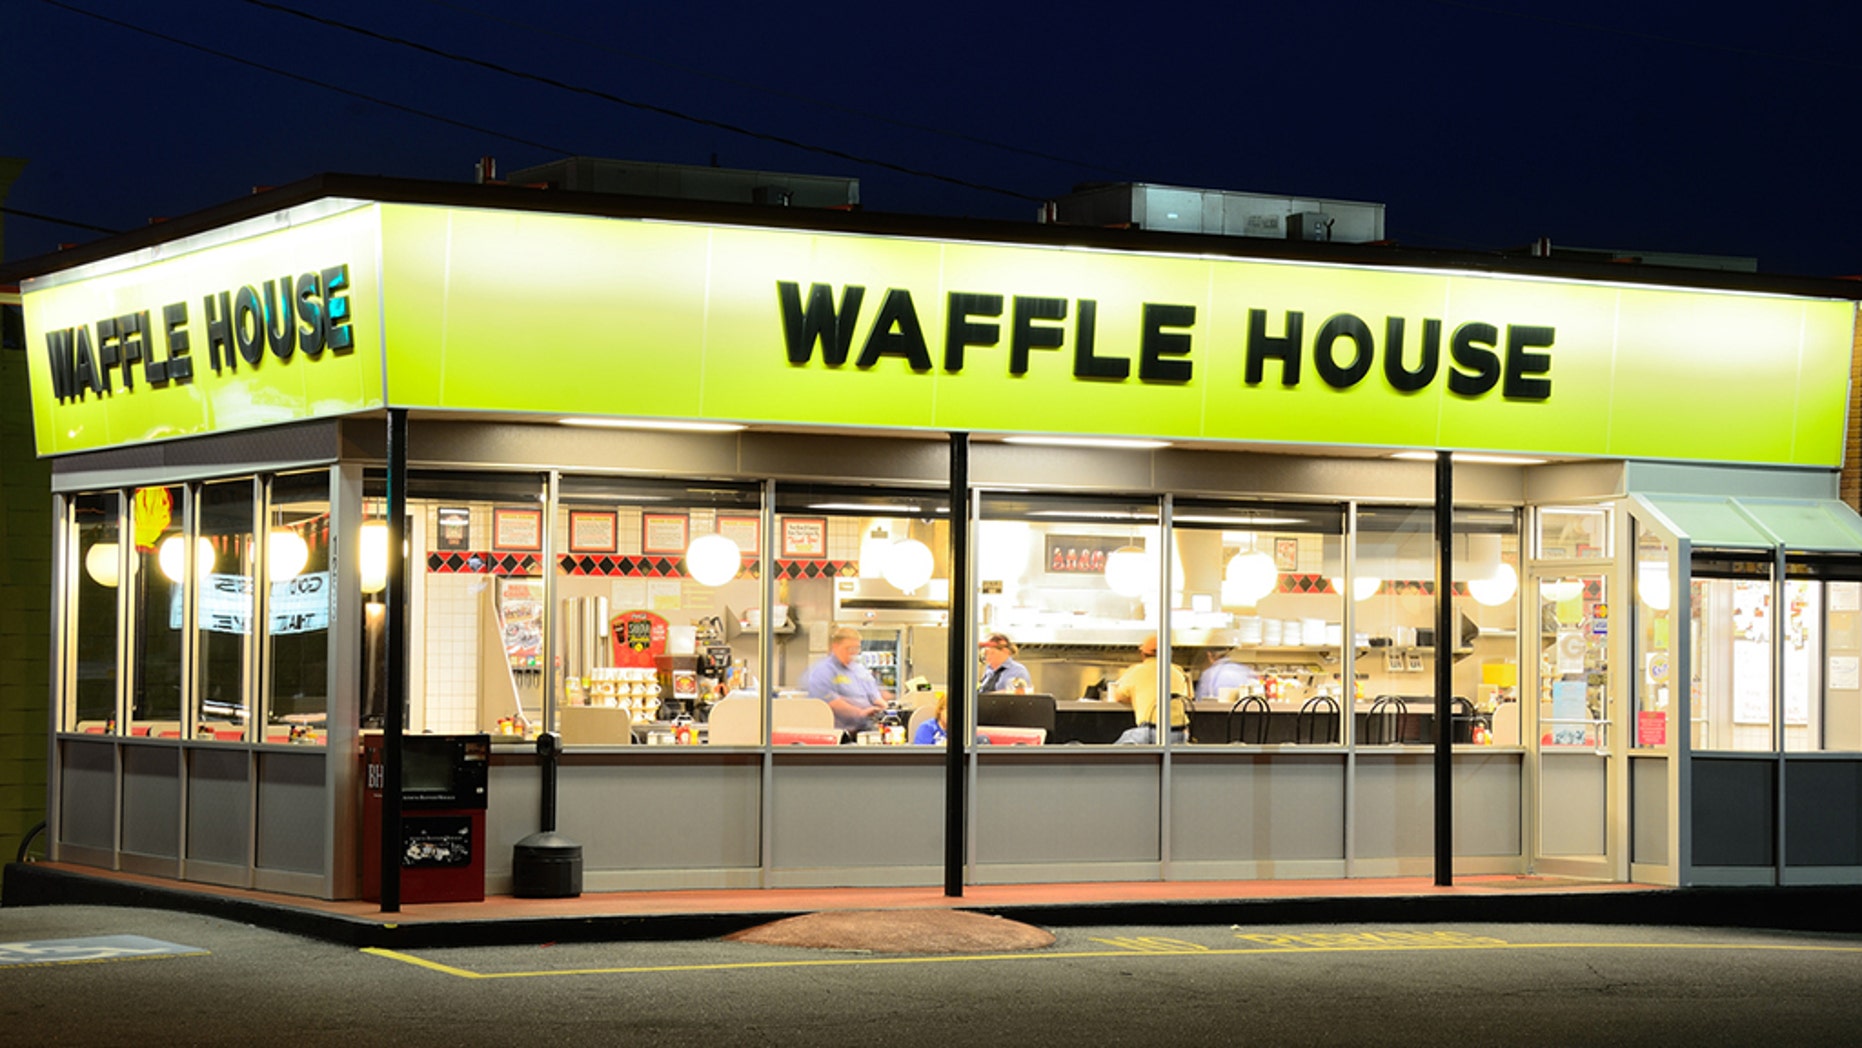 South Carolina Waffle House stays open even after truck crashes into it